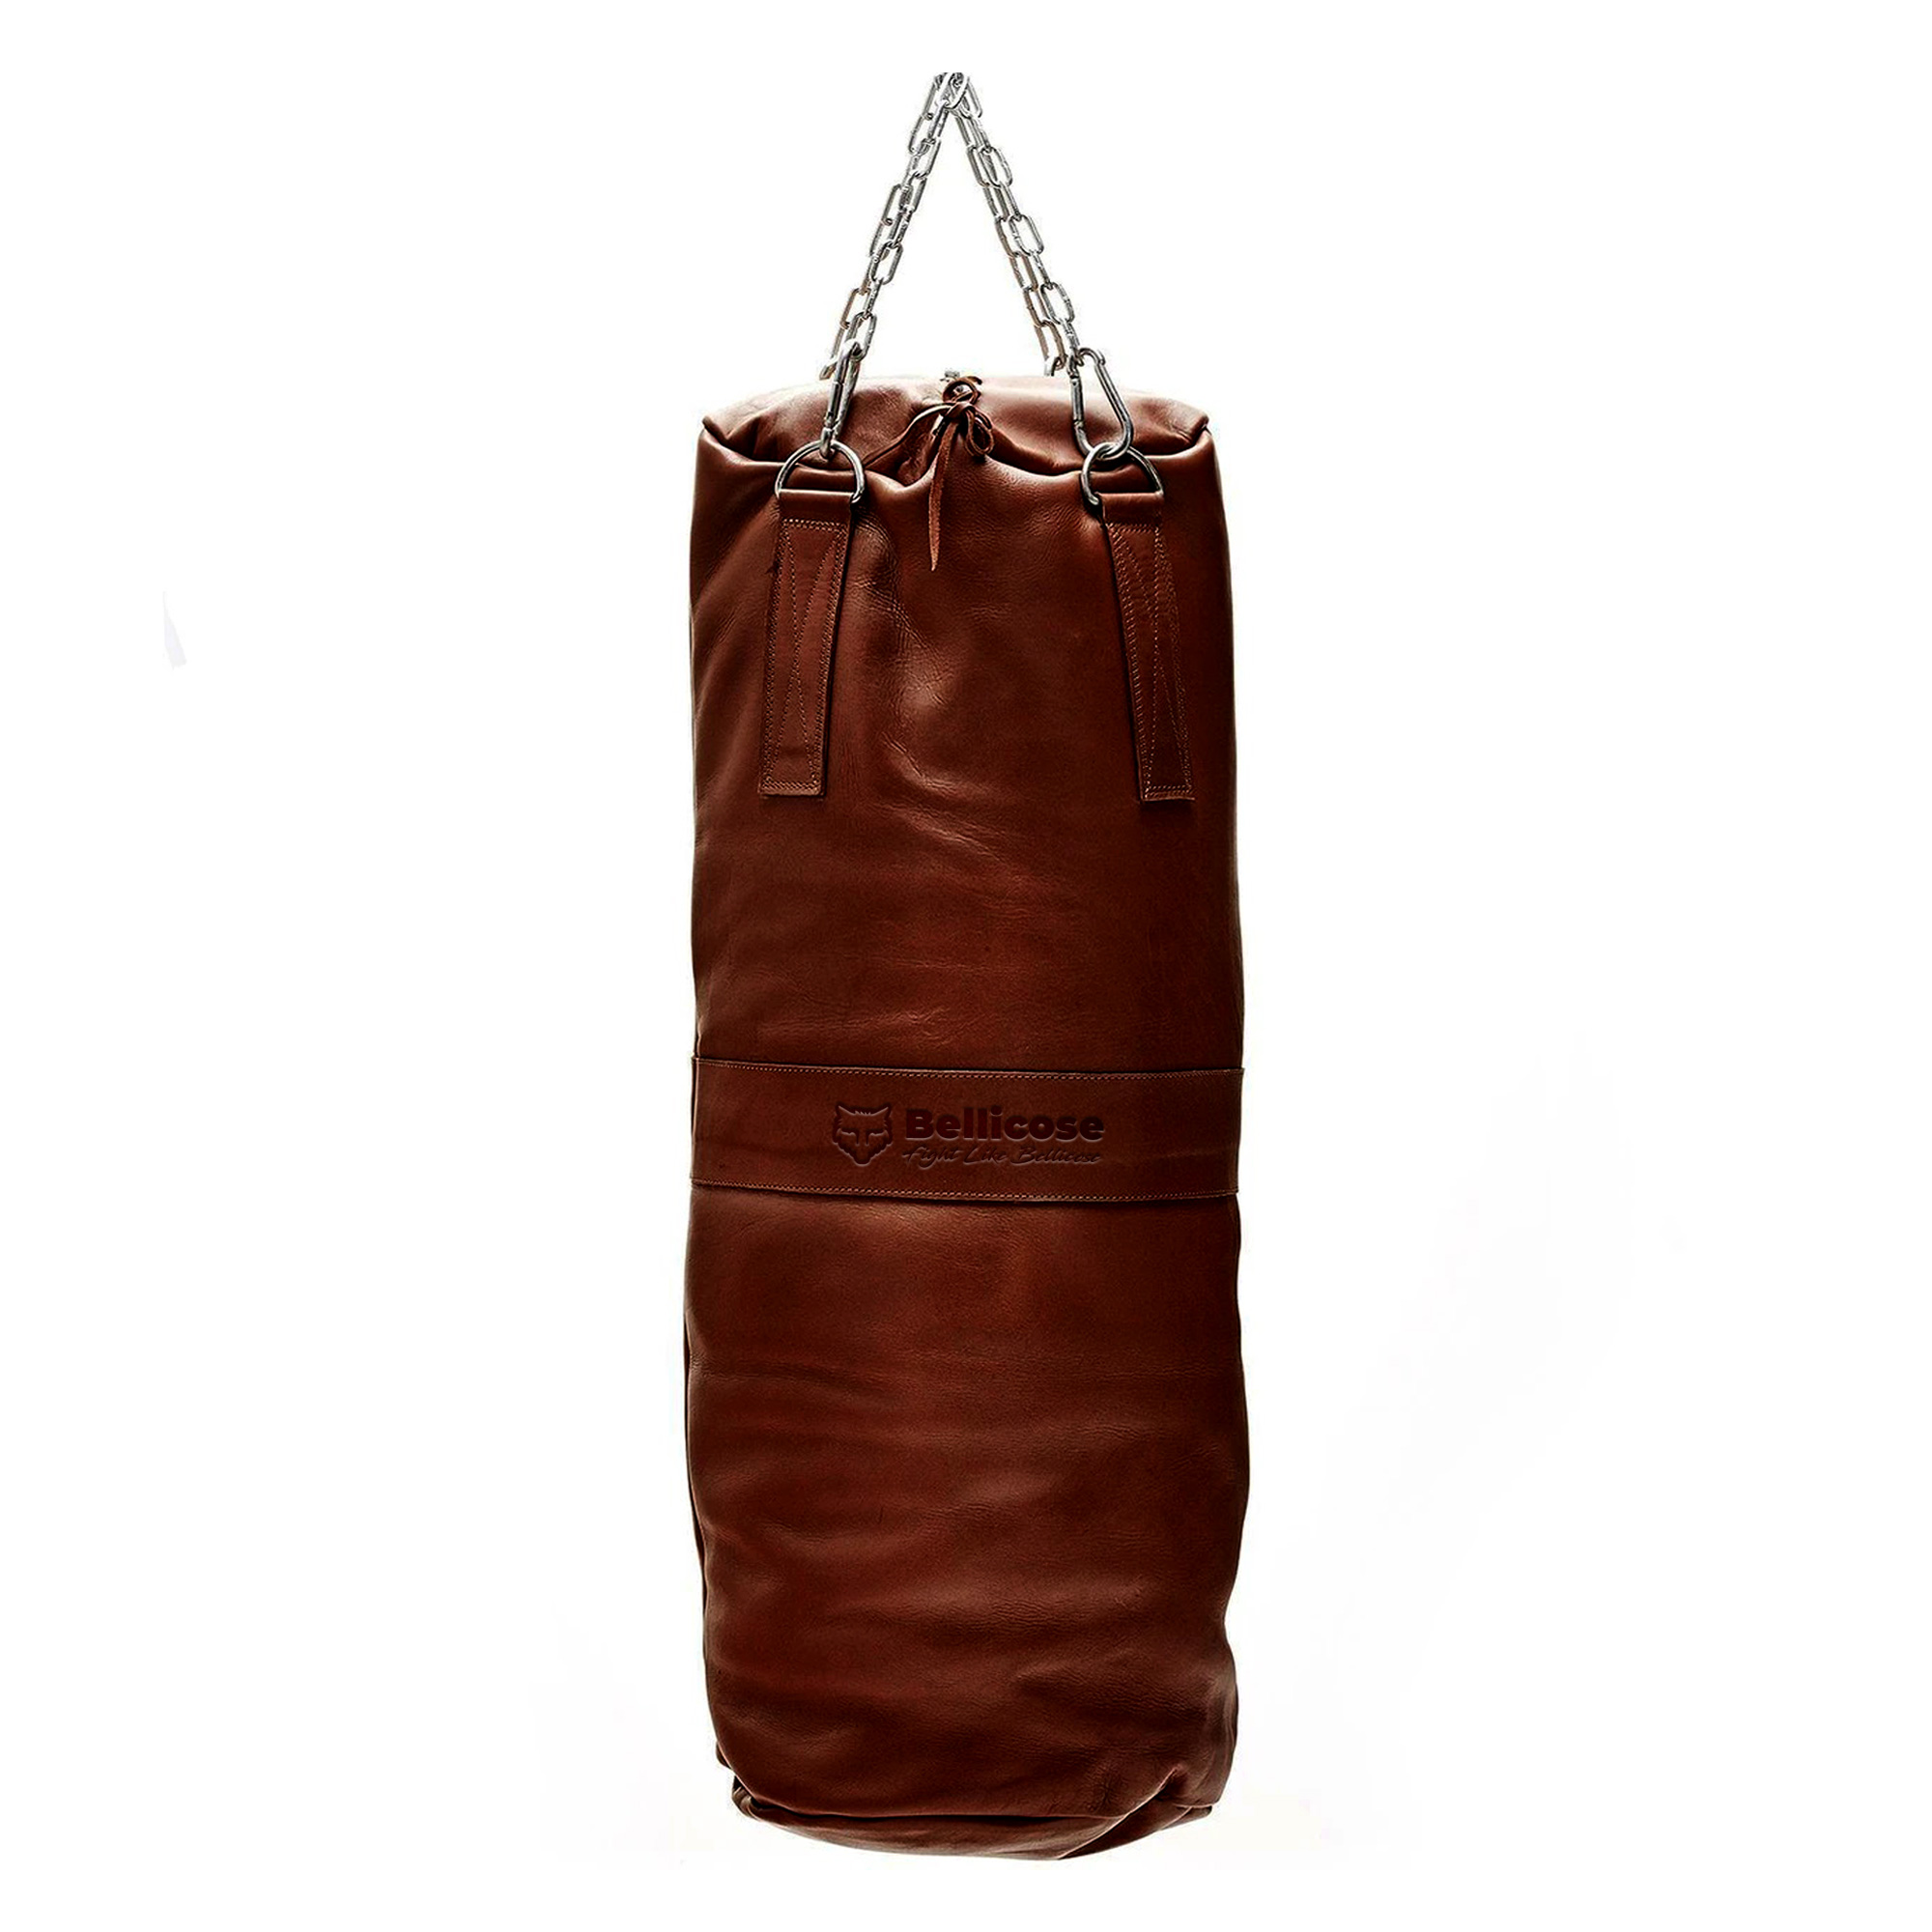 Heritage Brown Leather Heavy Martial Arts Punching Bag | The Bellicose